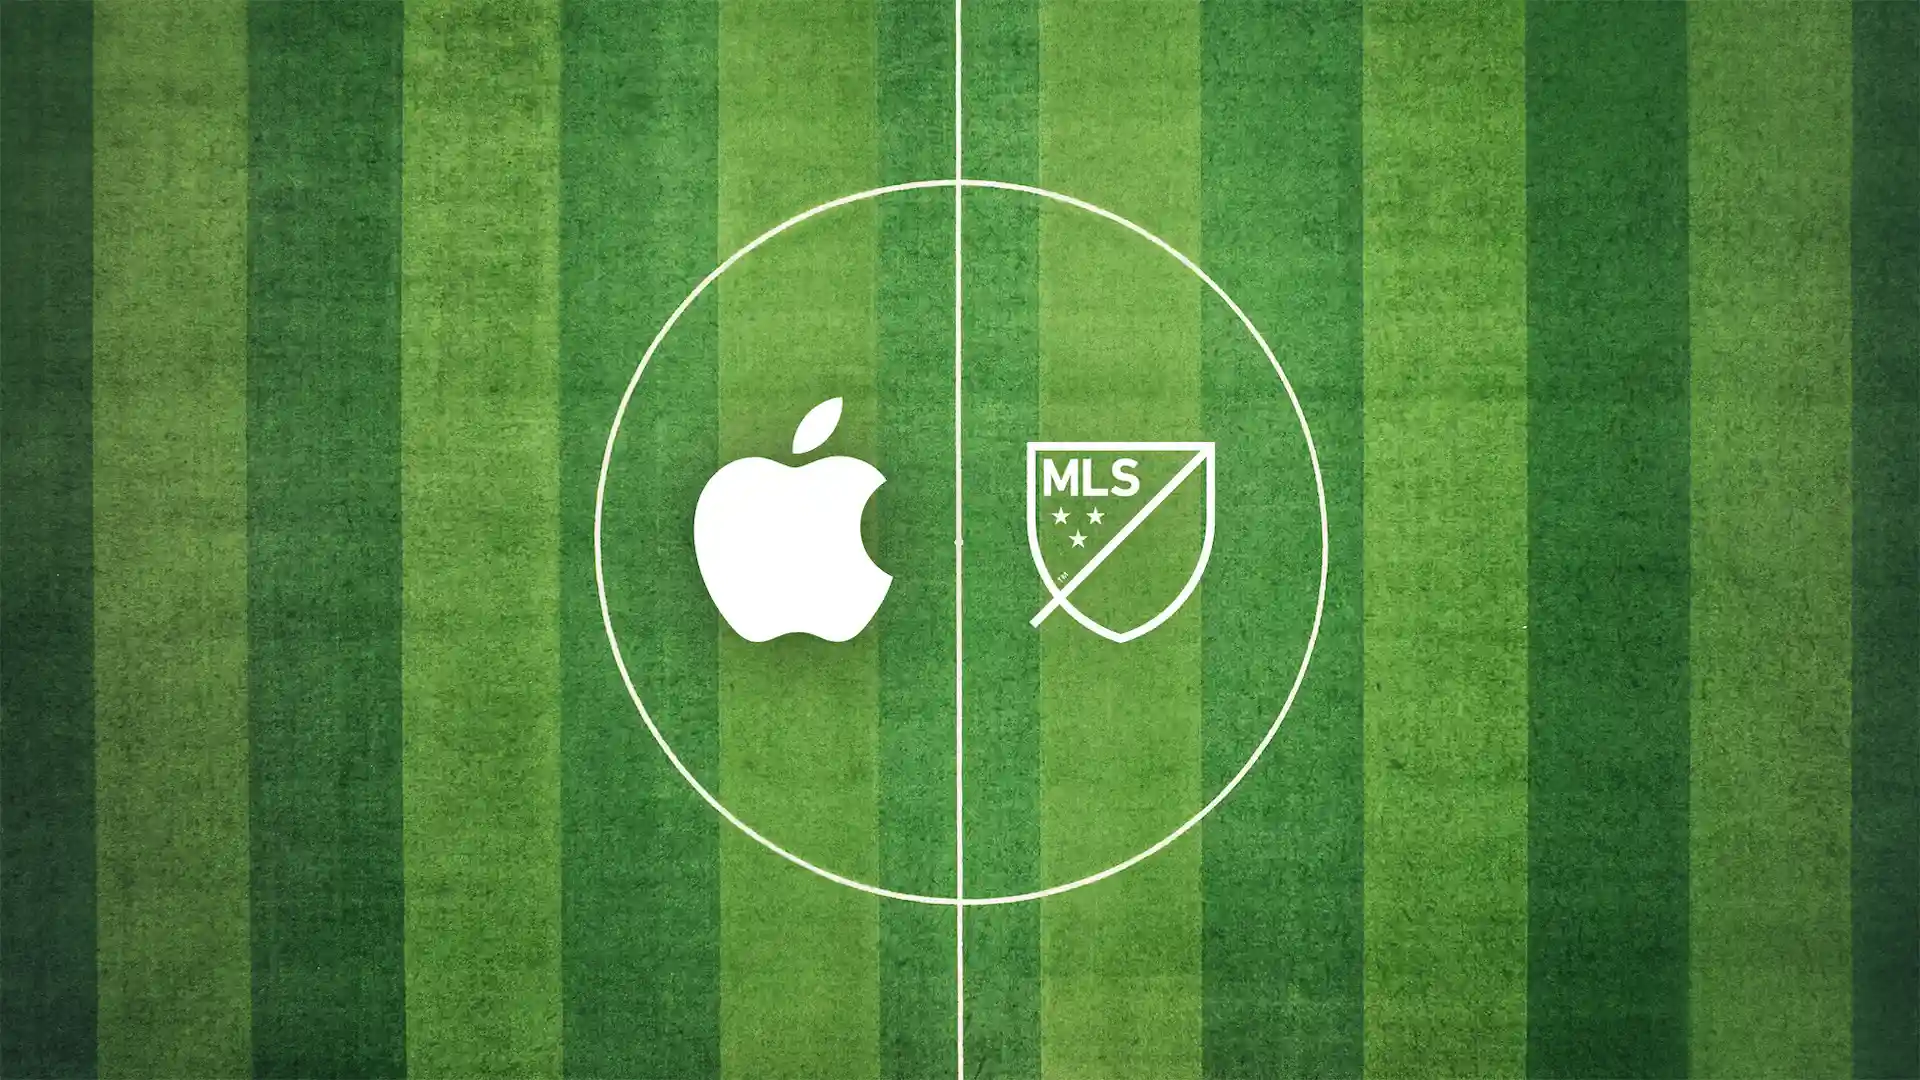 Apple TV Plus will compete with ESPN and broadcast football matches online